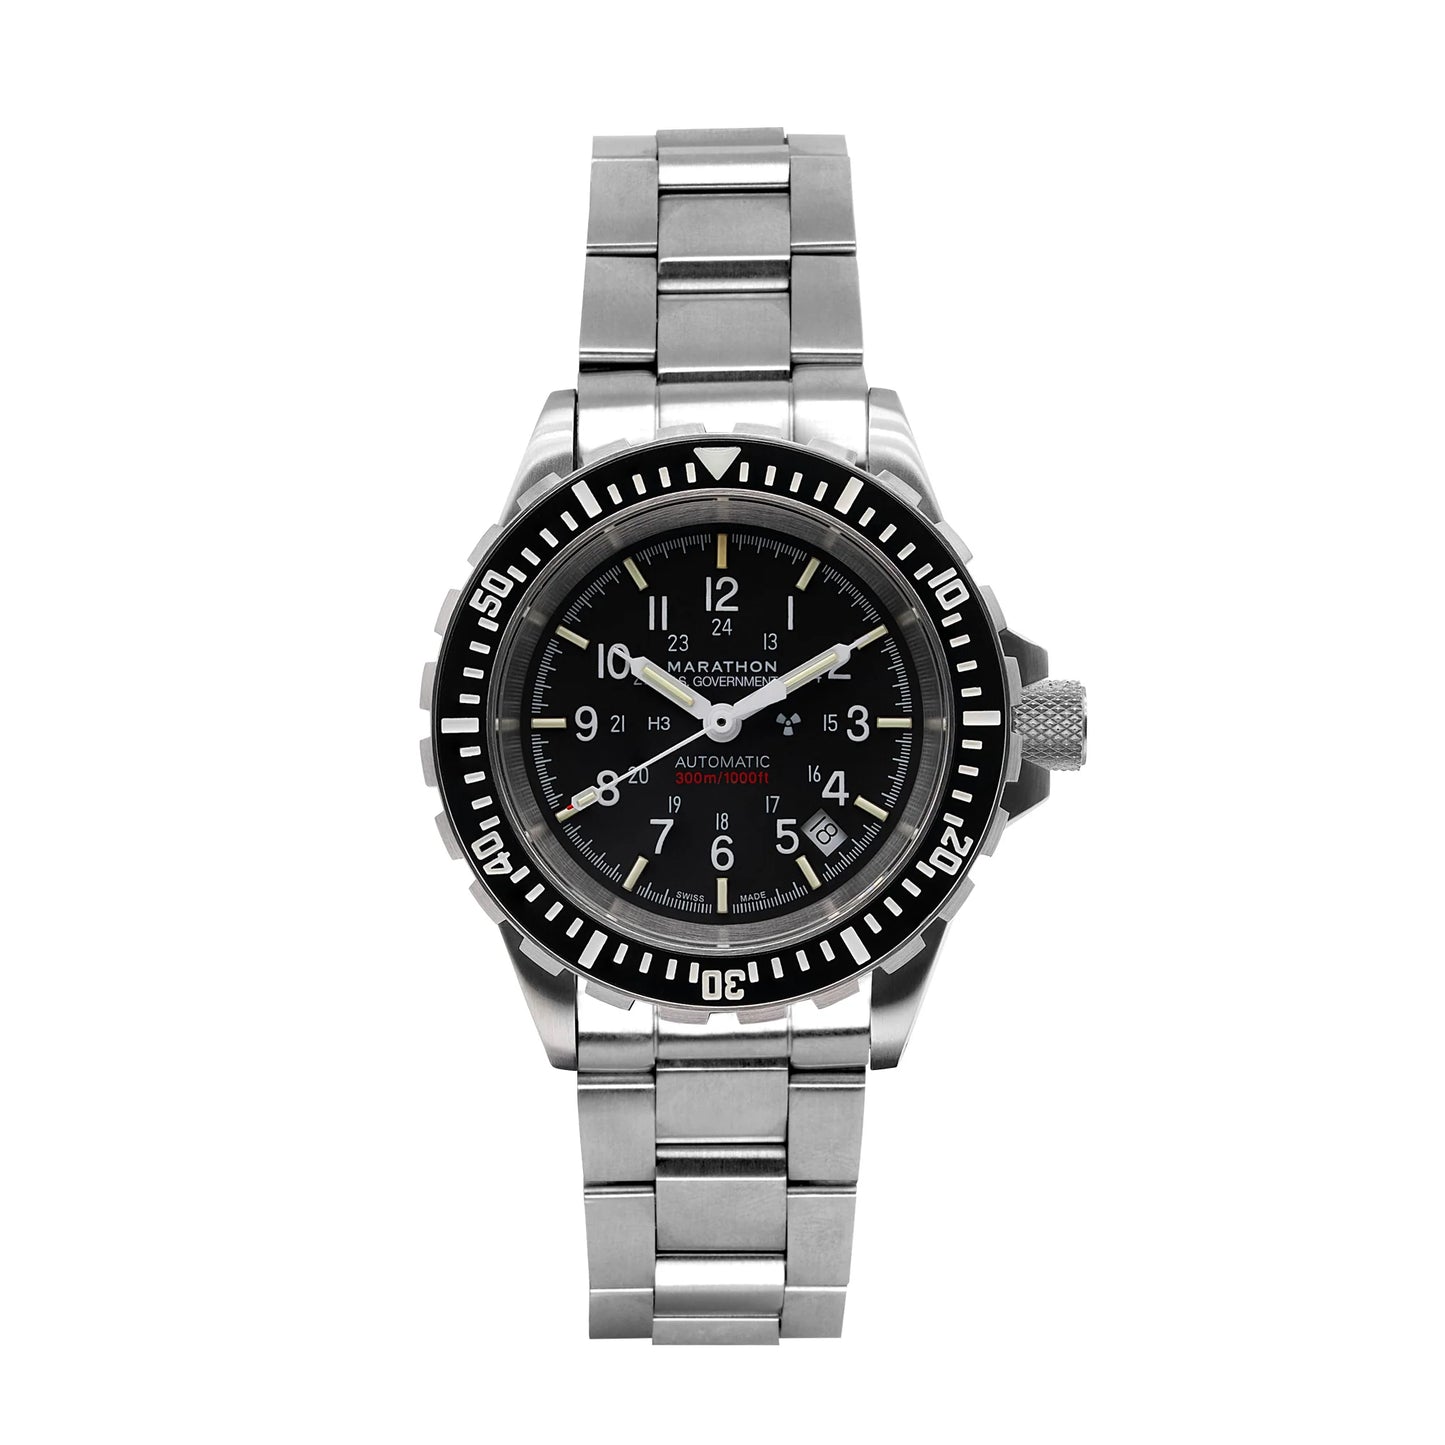 Marathon 41mm Diver's Automatic (GSAR) with Stainless Steel Bracelet